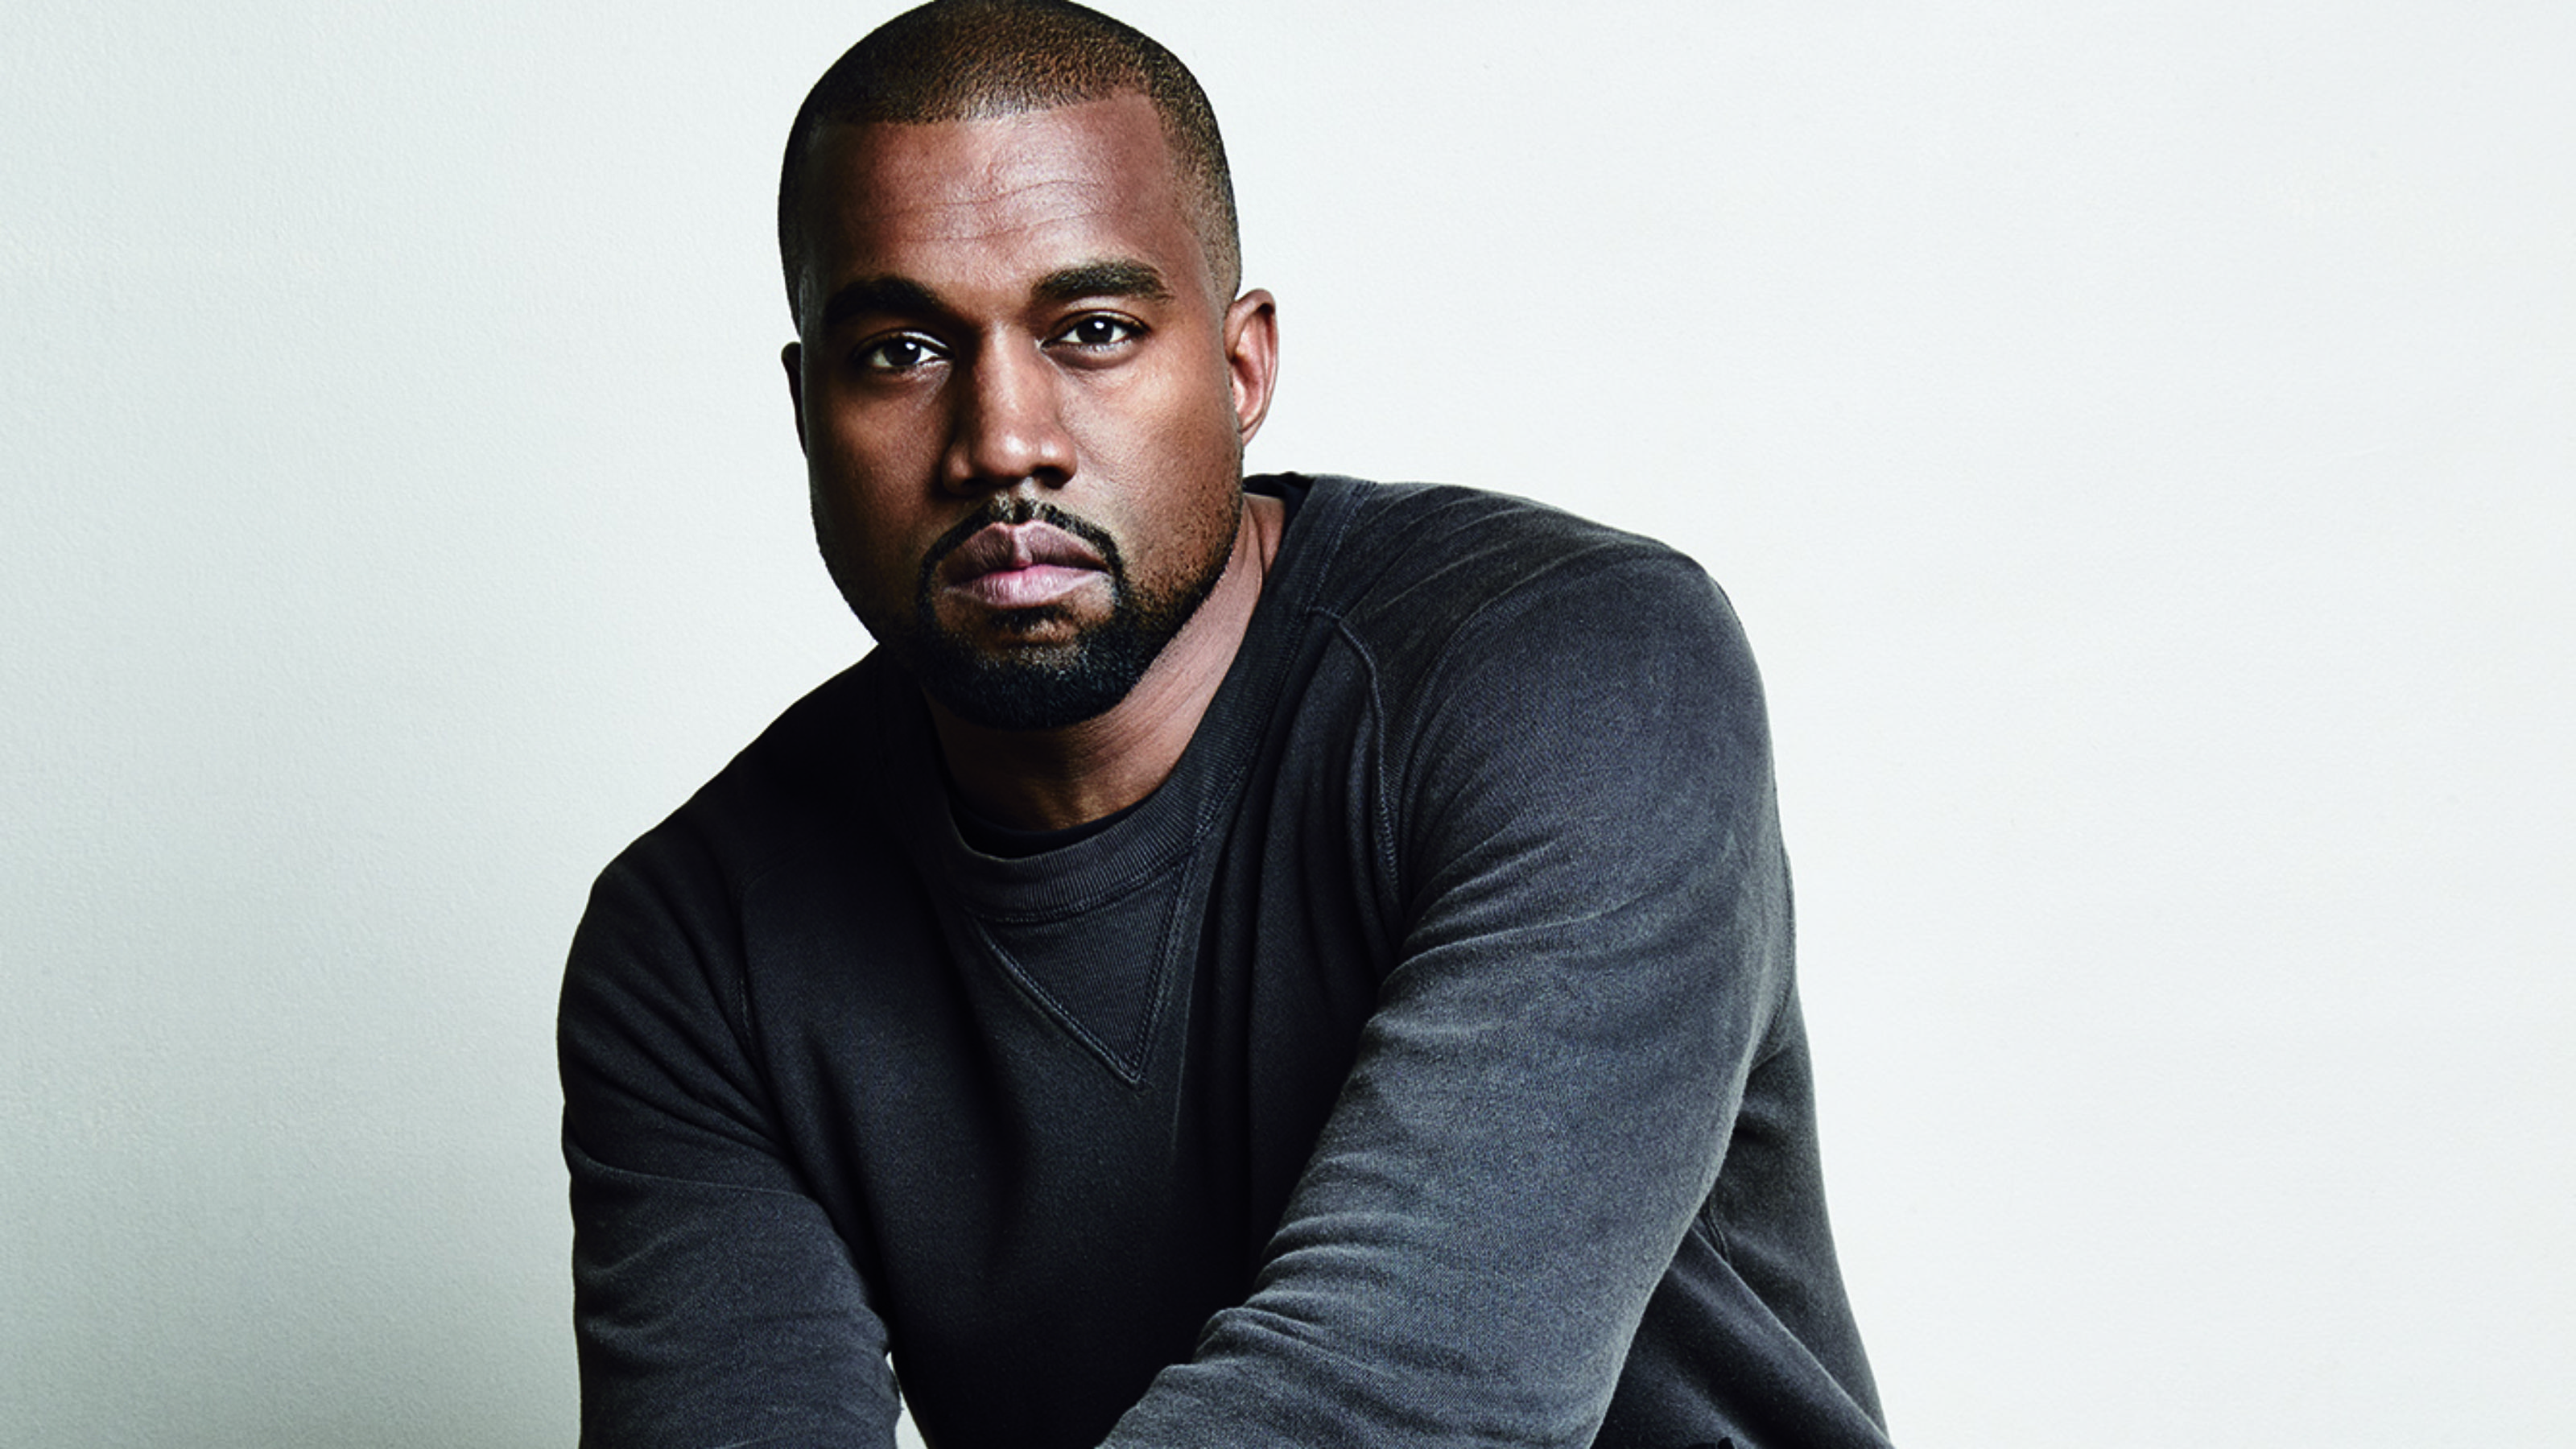 Kanye West breaks ARIA Singles Chart record with Donda